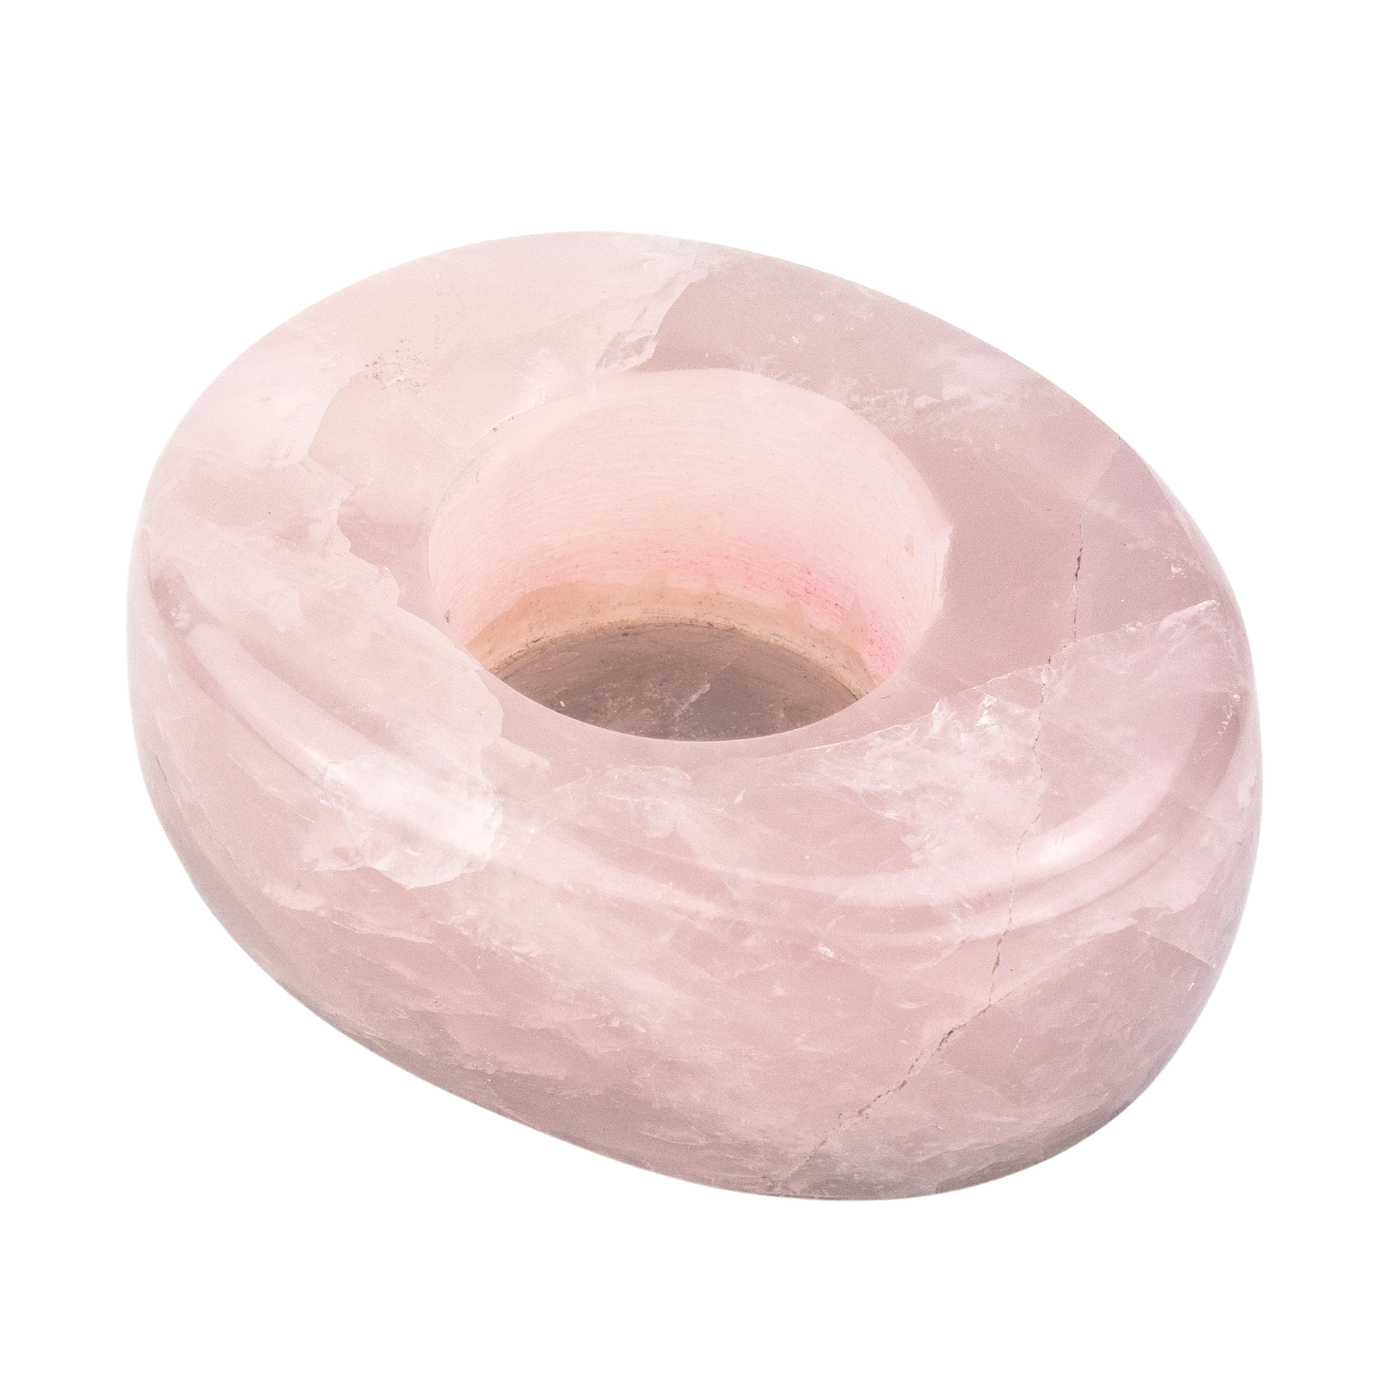 alternate view of rose quartz tealight candle holder by Energy Muse